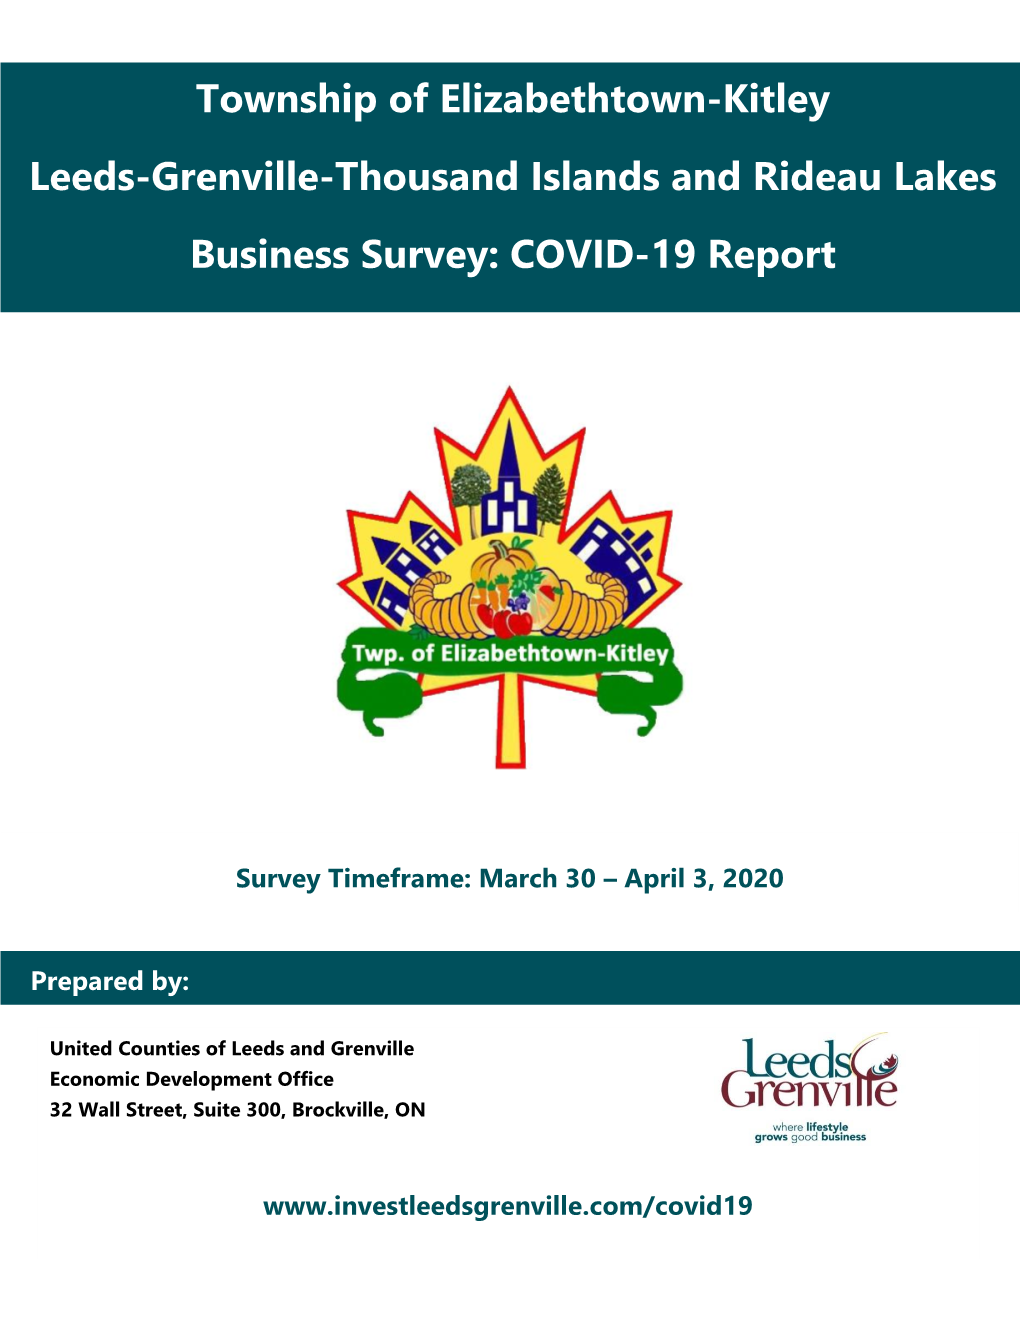 Township of Elizabethtown-Kitley Leeds-Grenville-Thousand Islands and Rideau Lakes Business Survey: COVID-19 Report